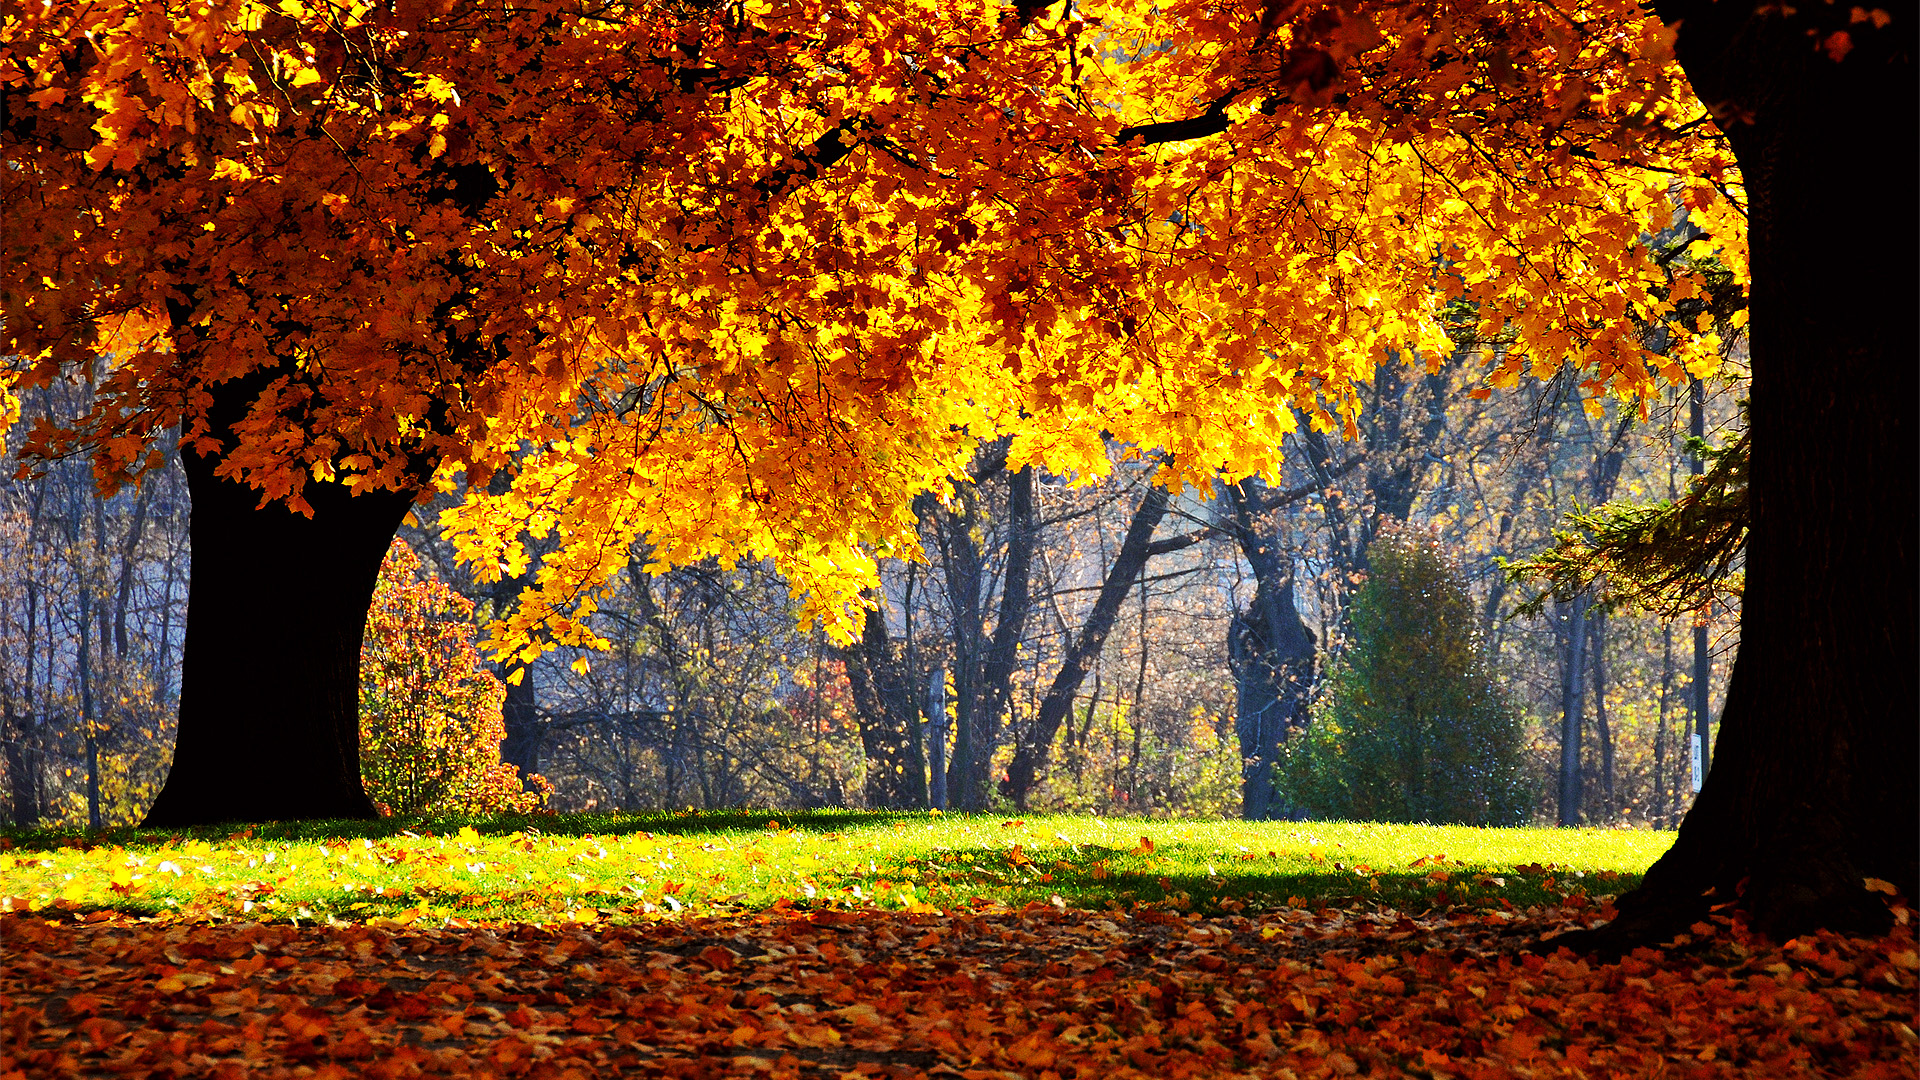 Abstract Hd Wallpapers 1080p Autumn fall wallpapers p